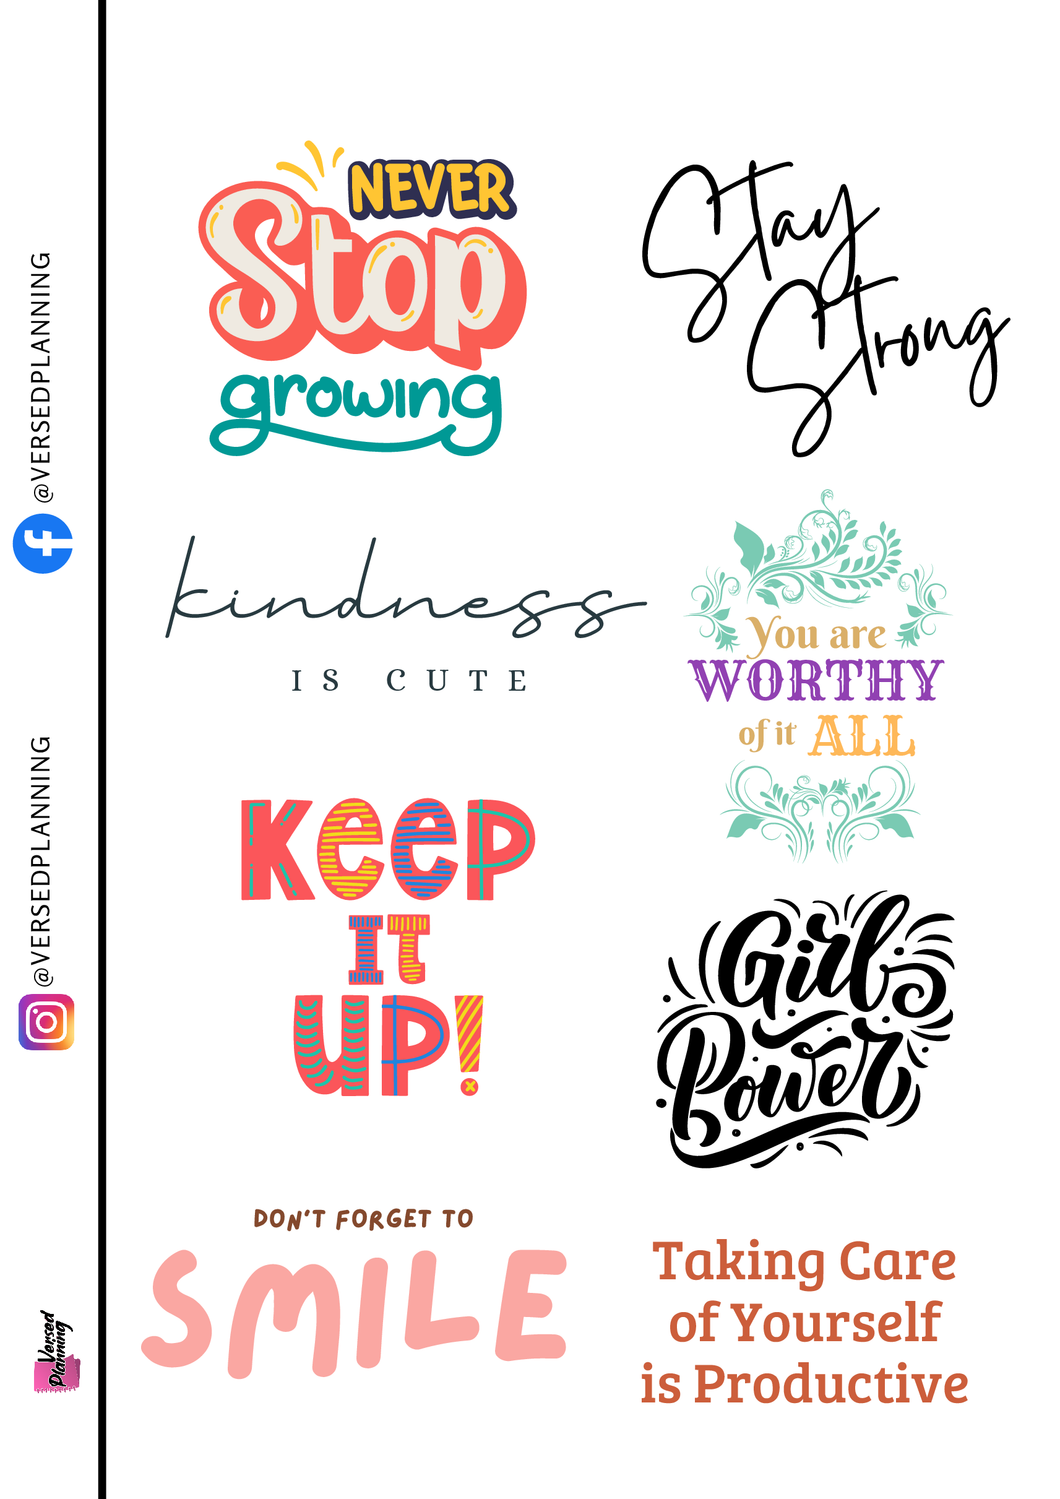 Never stop growing Quote Sheet